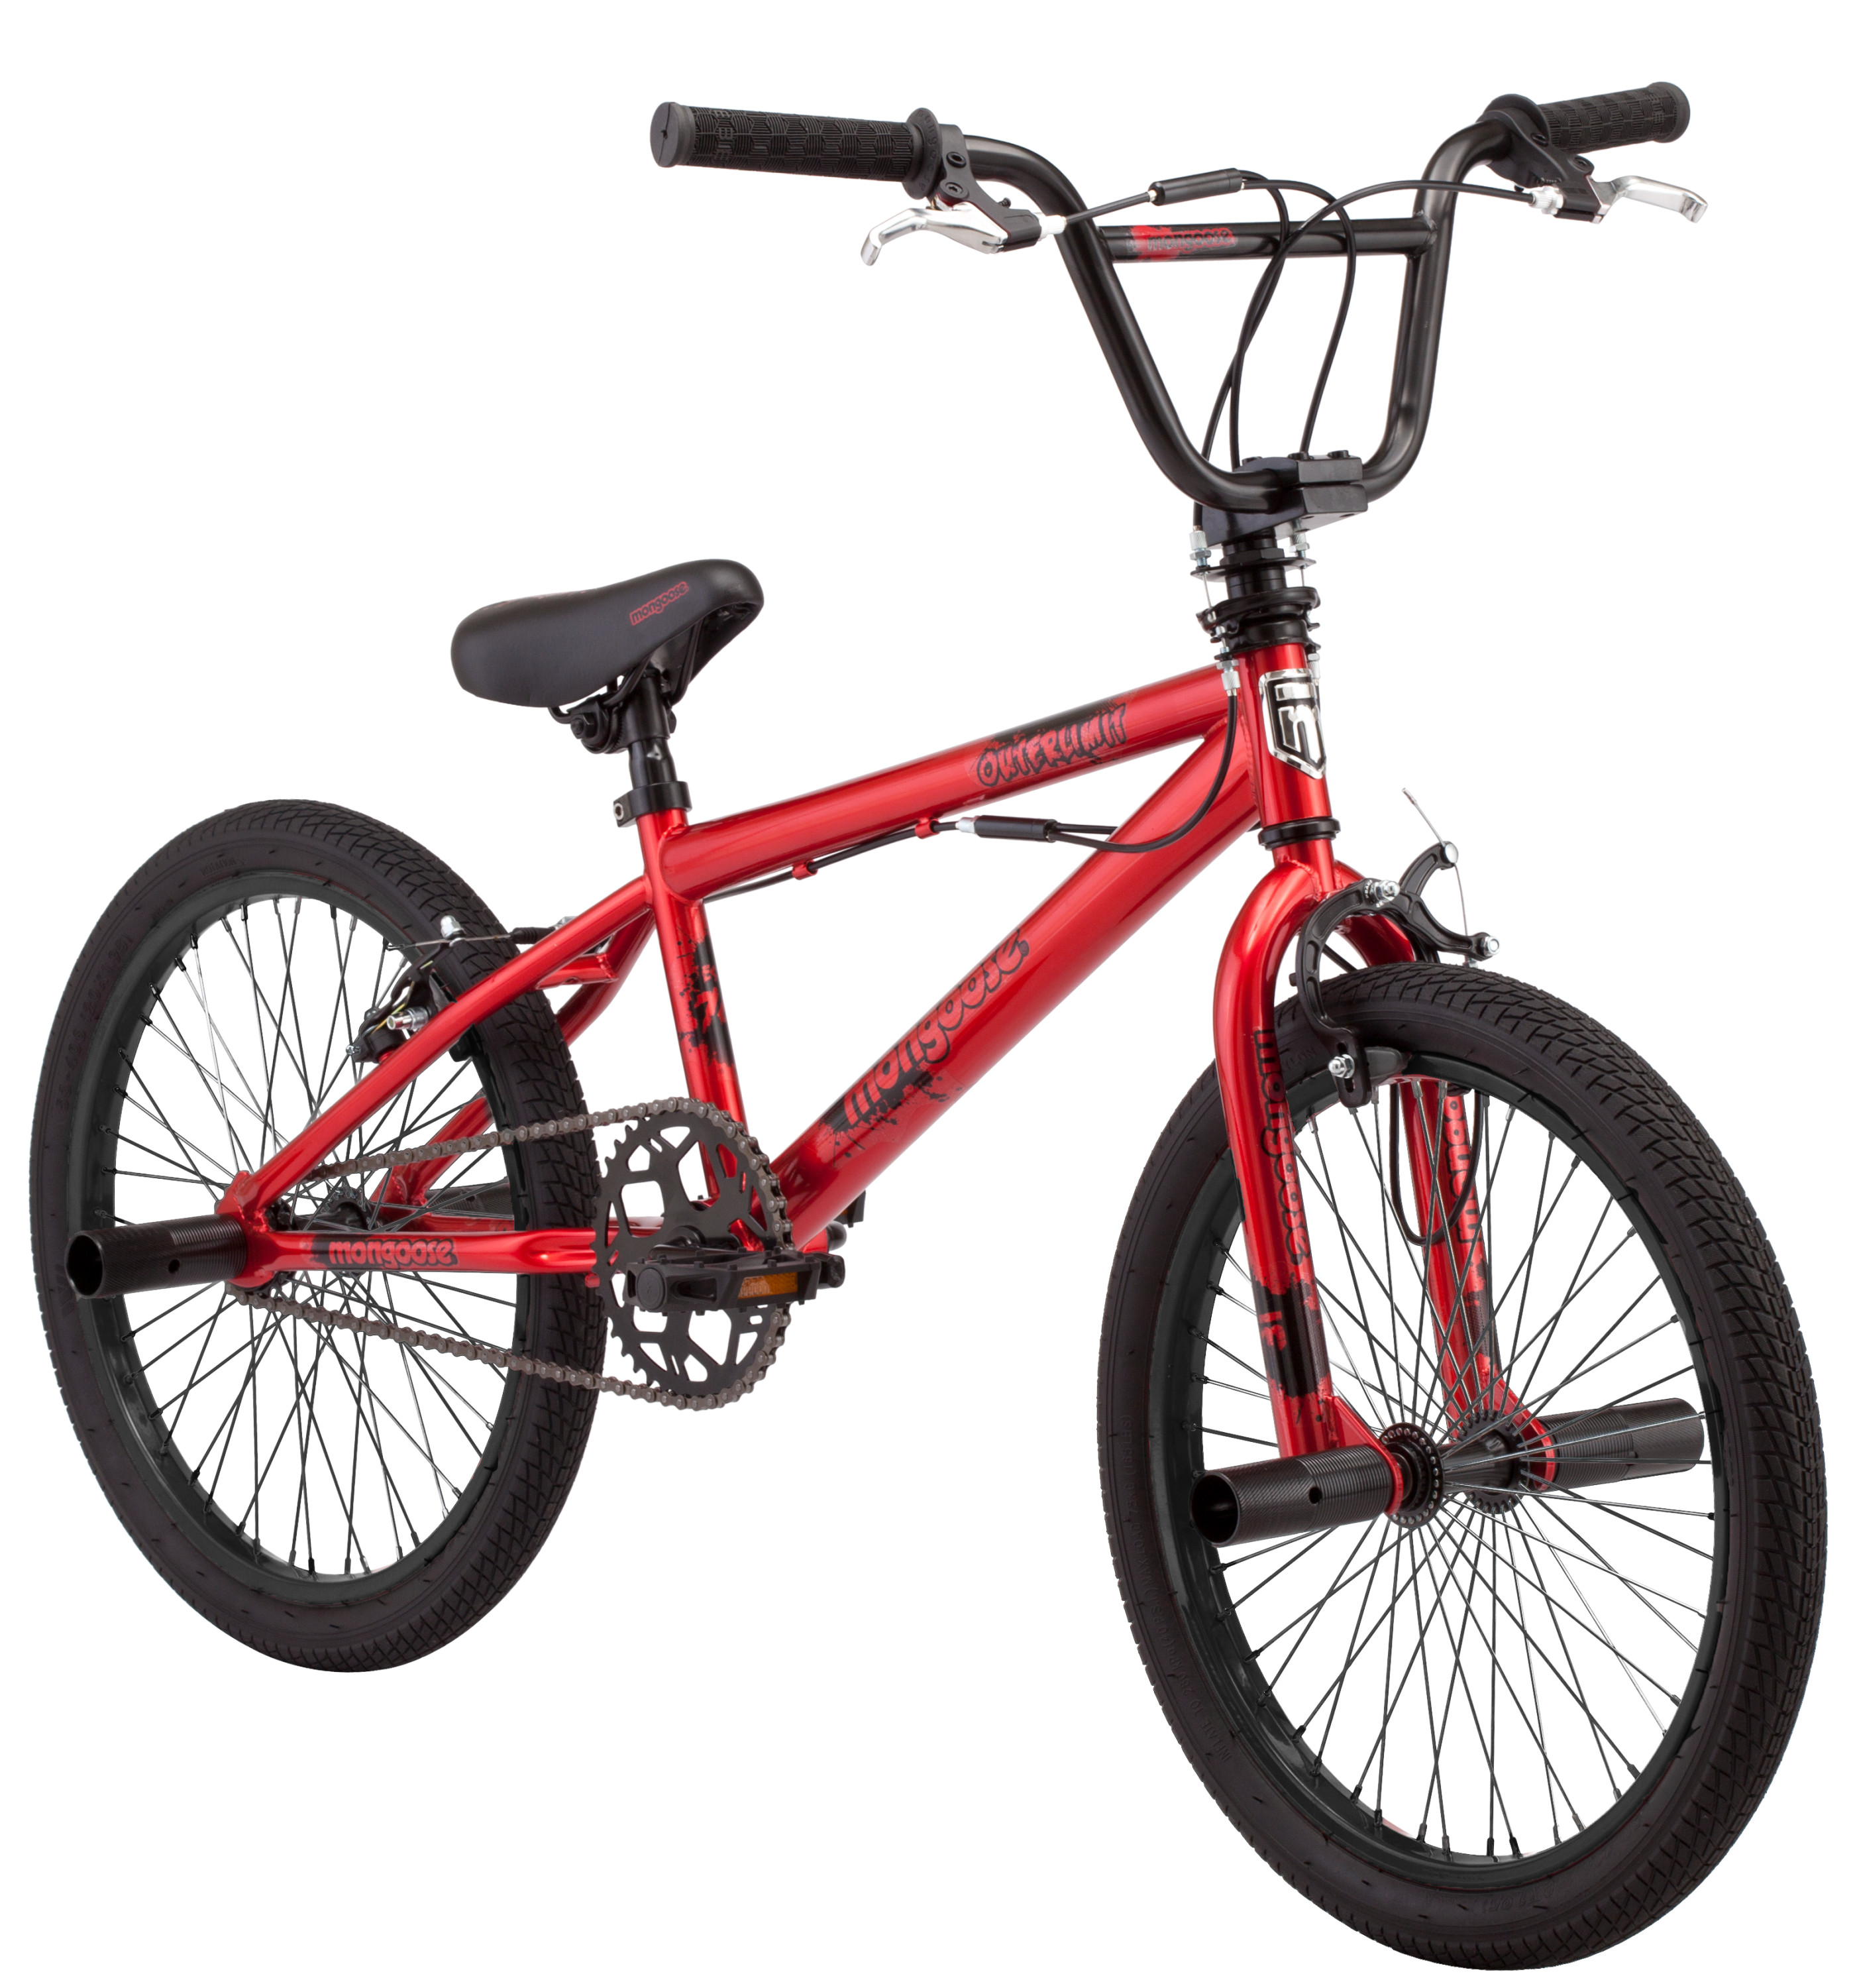 Mongoose 20" Outerlimit BMX Bike, Red - image 1 of 8